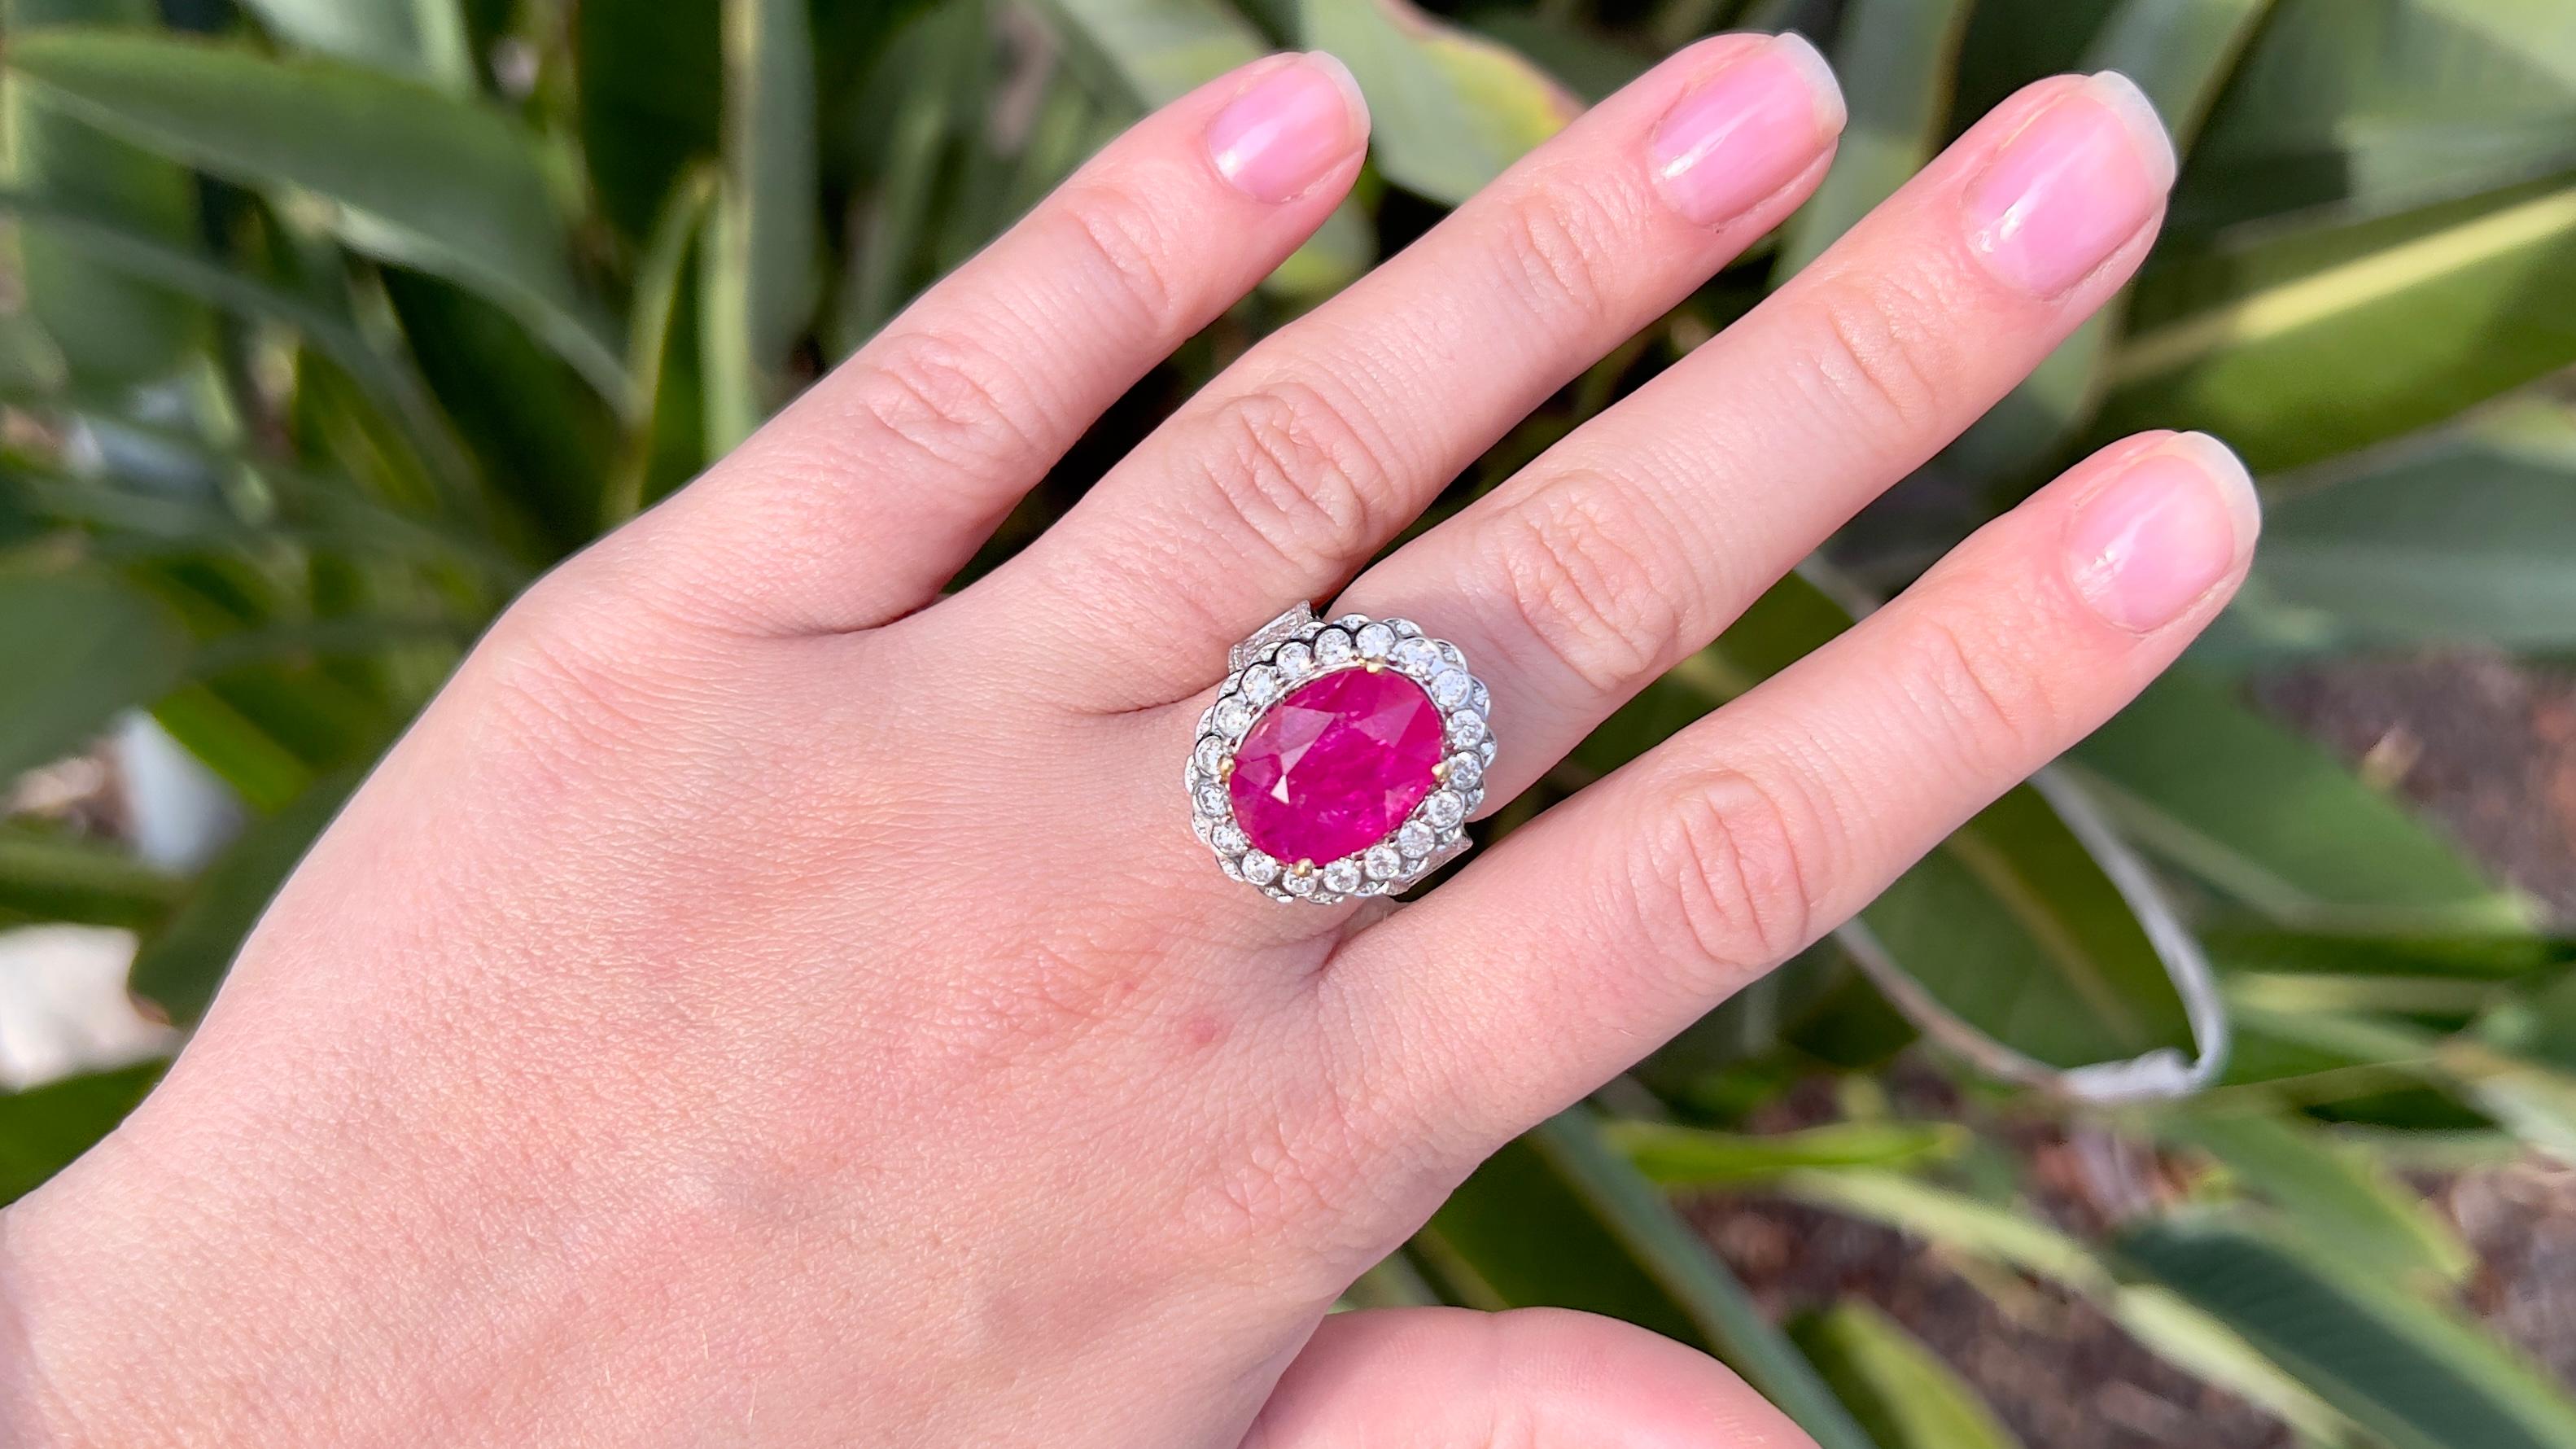 Fine Ruby = 7.93 Carat 
Cut: Oval
Diamonds = 1.90 Carats
( Color: F, Clarity: VS )
Metal: 18K Gold
Ring Size: 6.75* US
*It can be resized complimentary